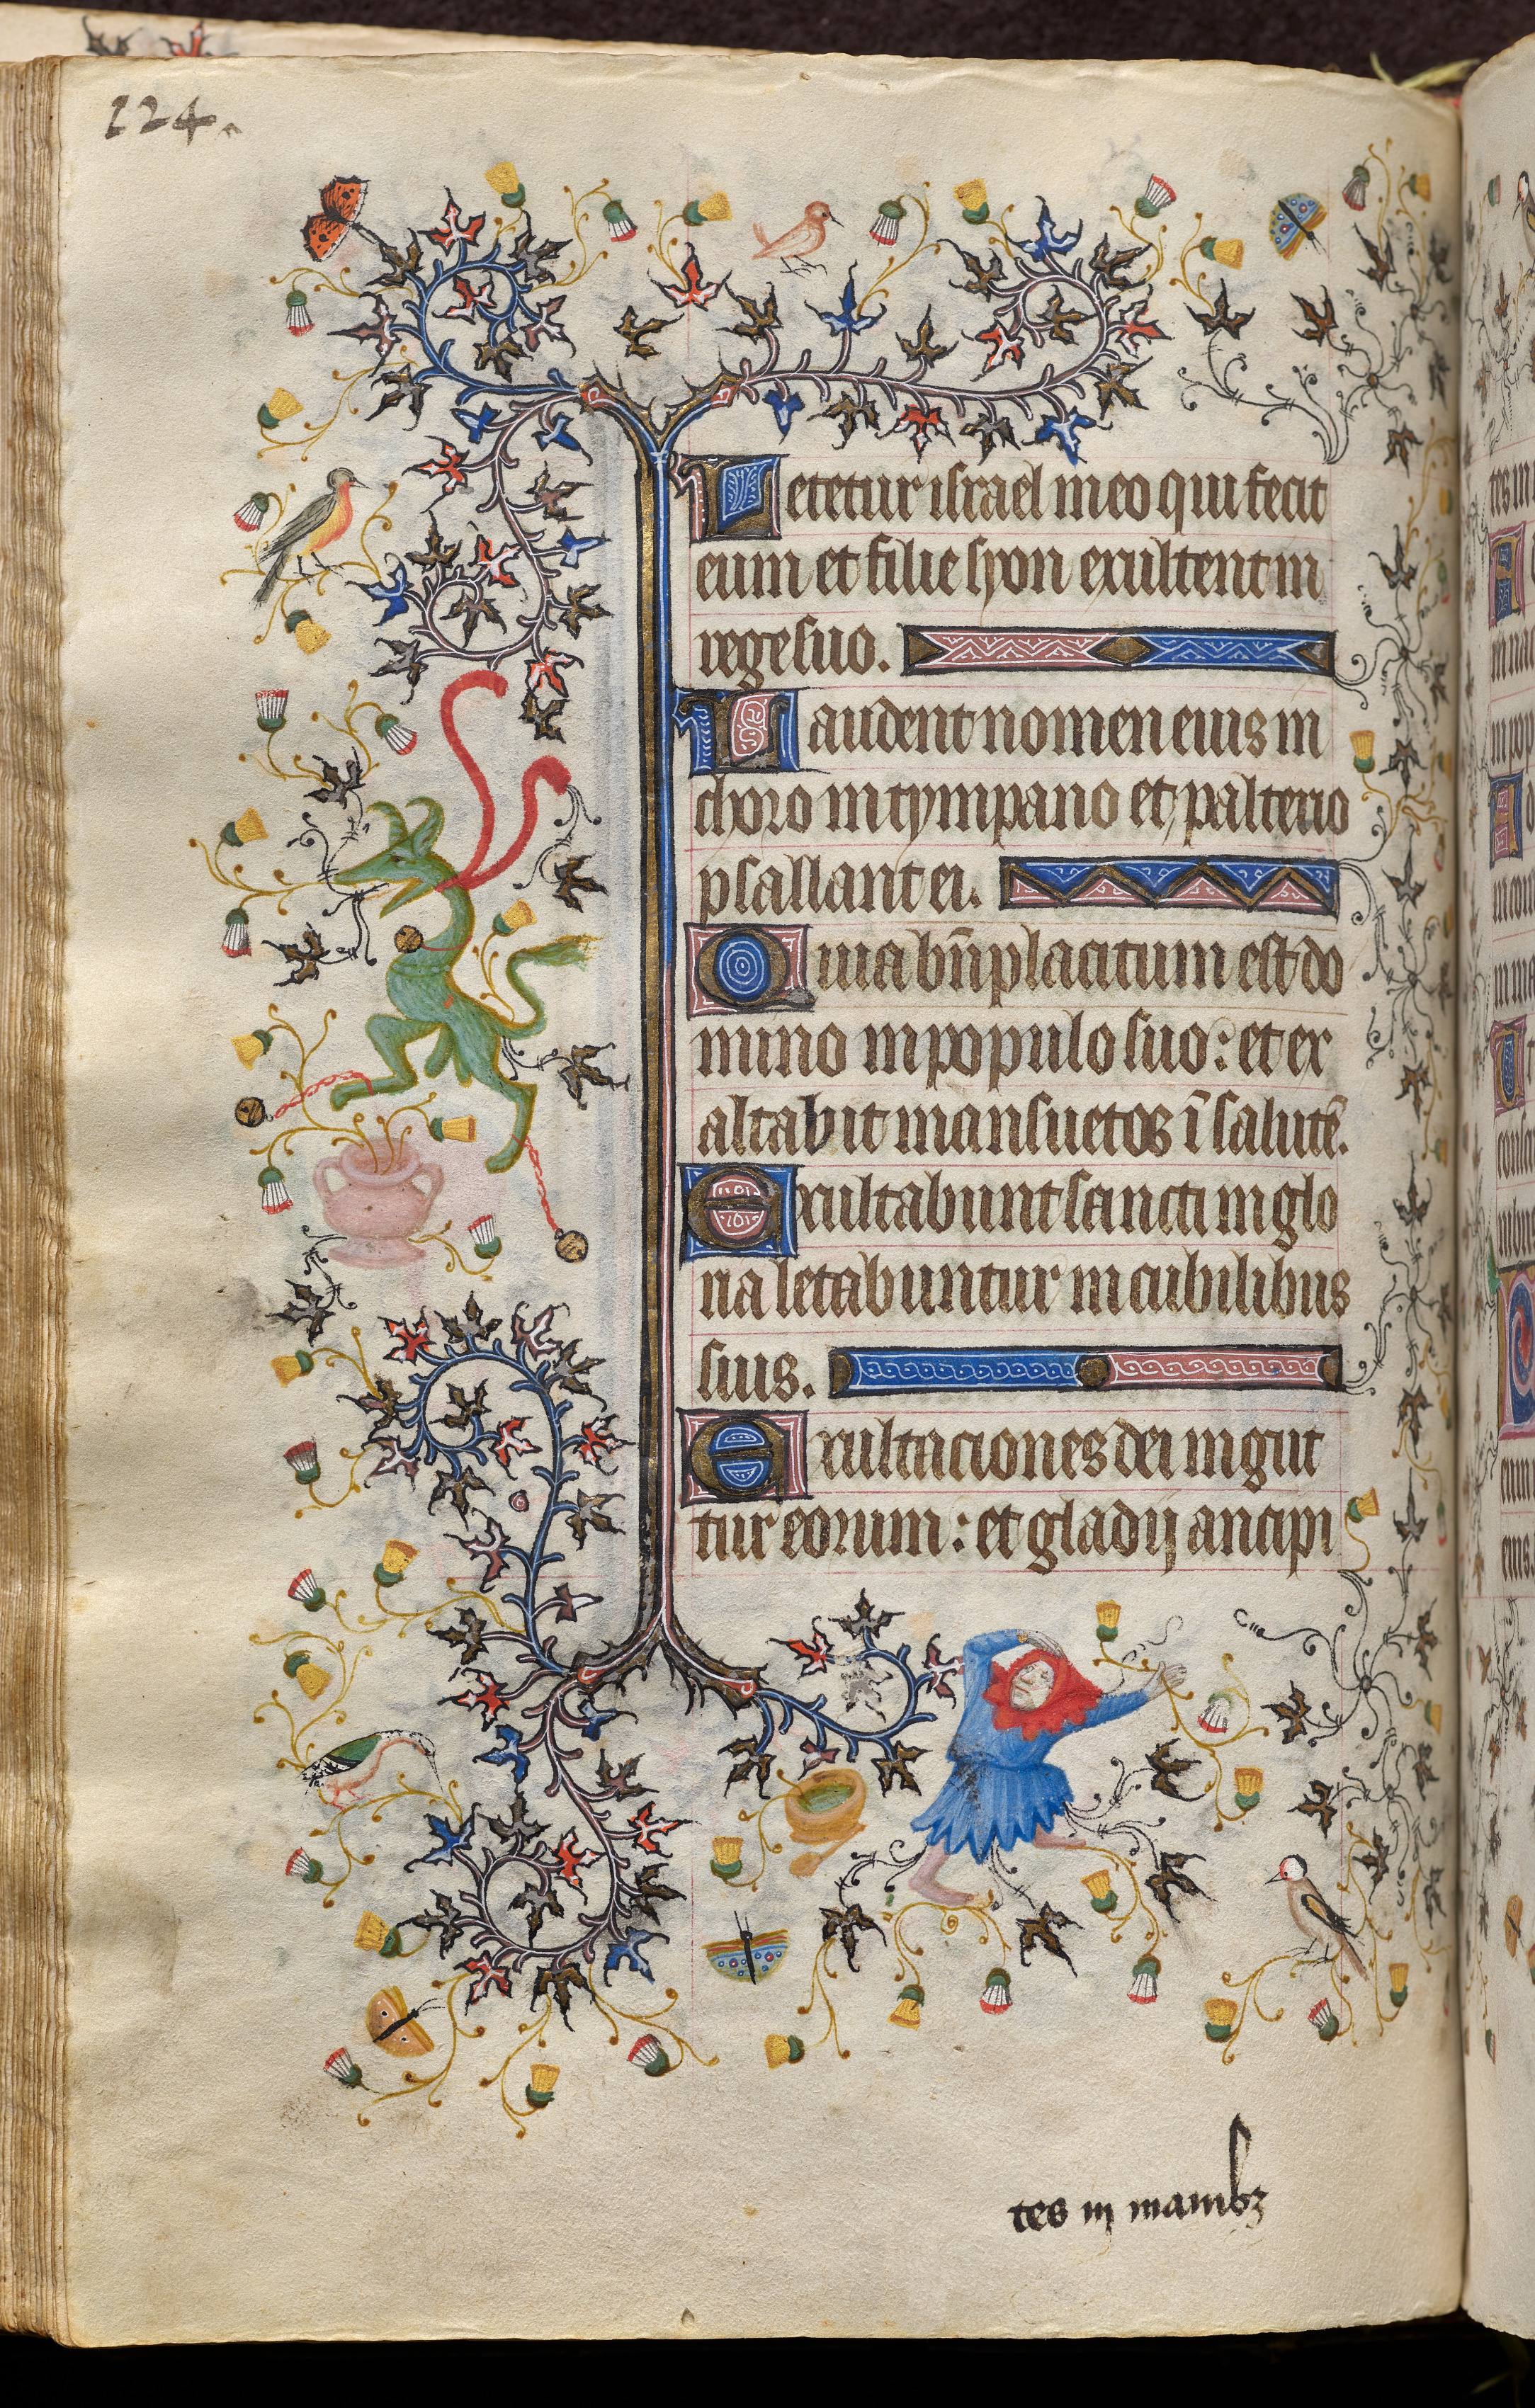 Hours of Charles the Noble, King of Navarre (1361-1425): fol. 62v, Text